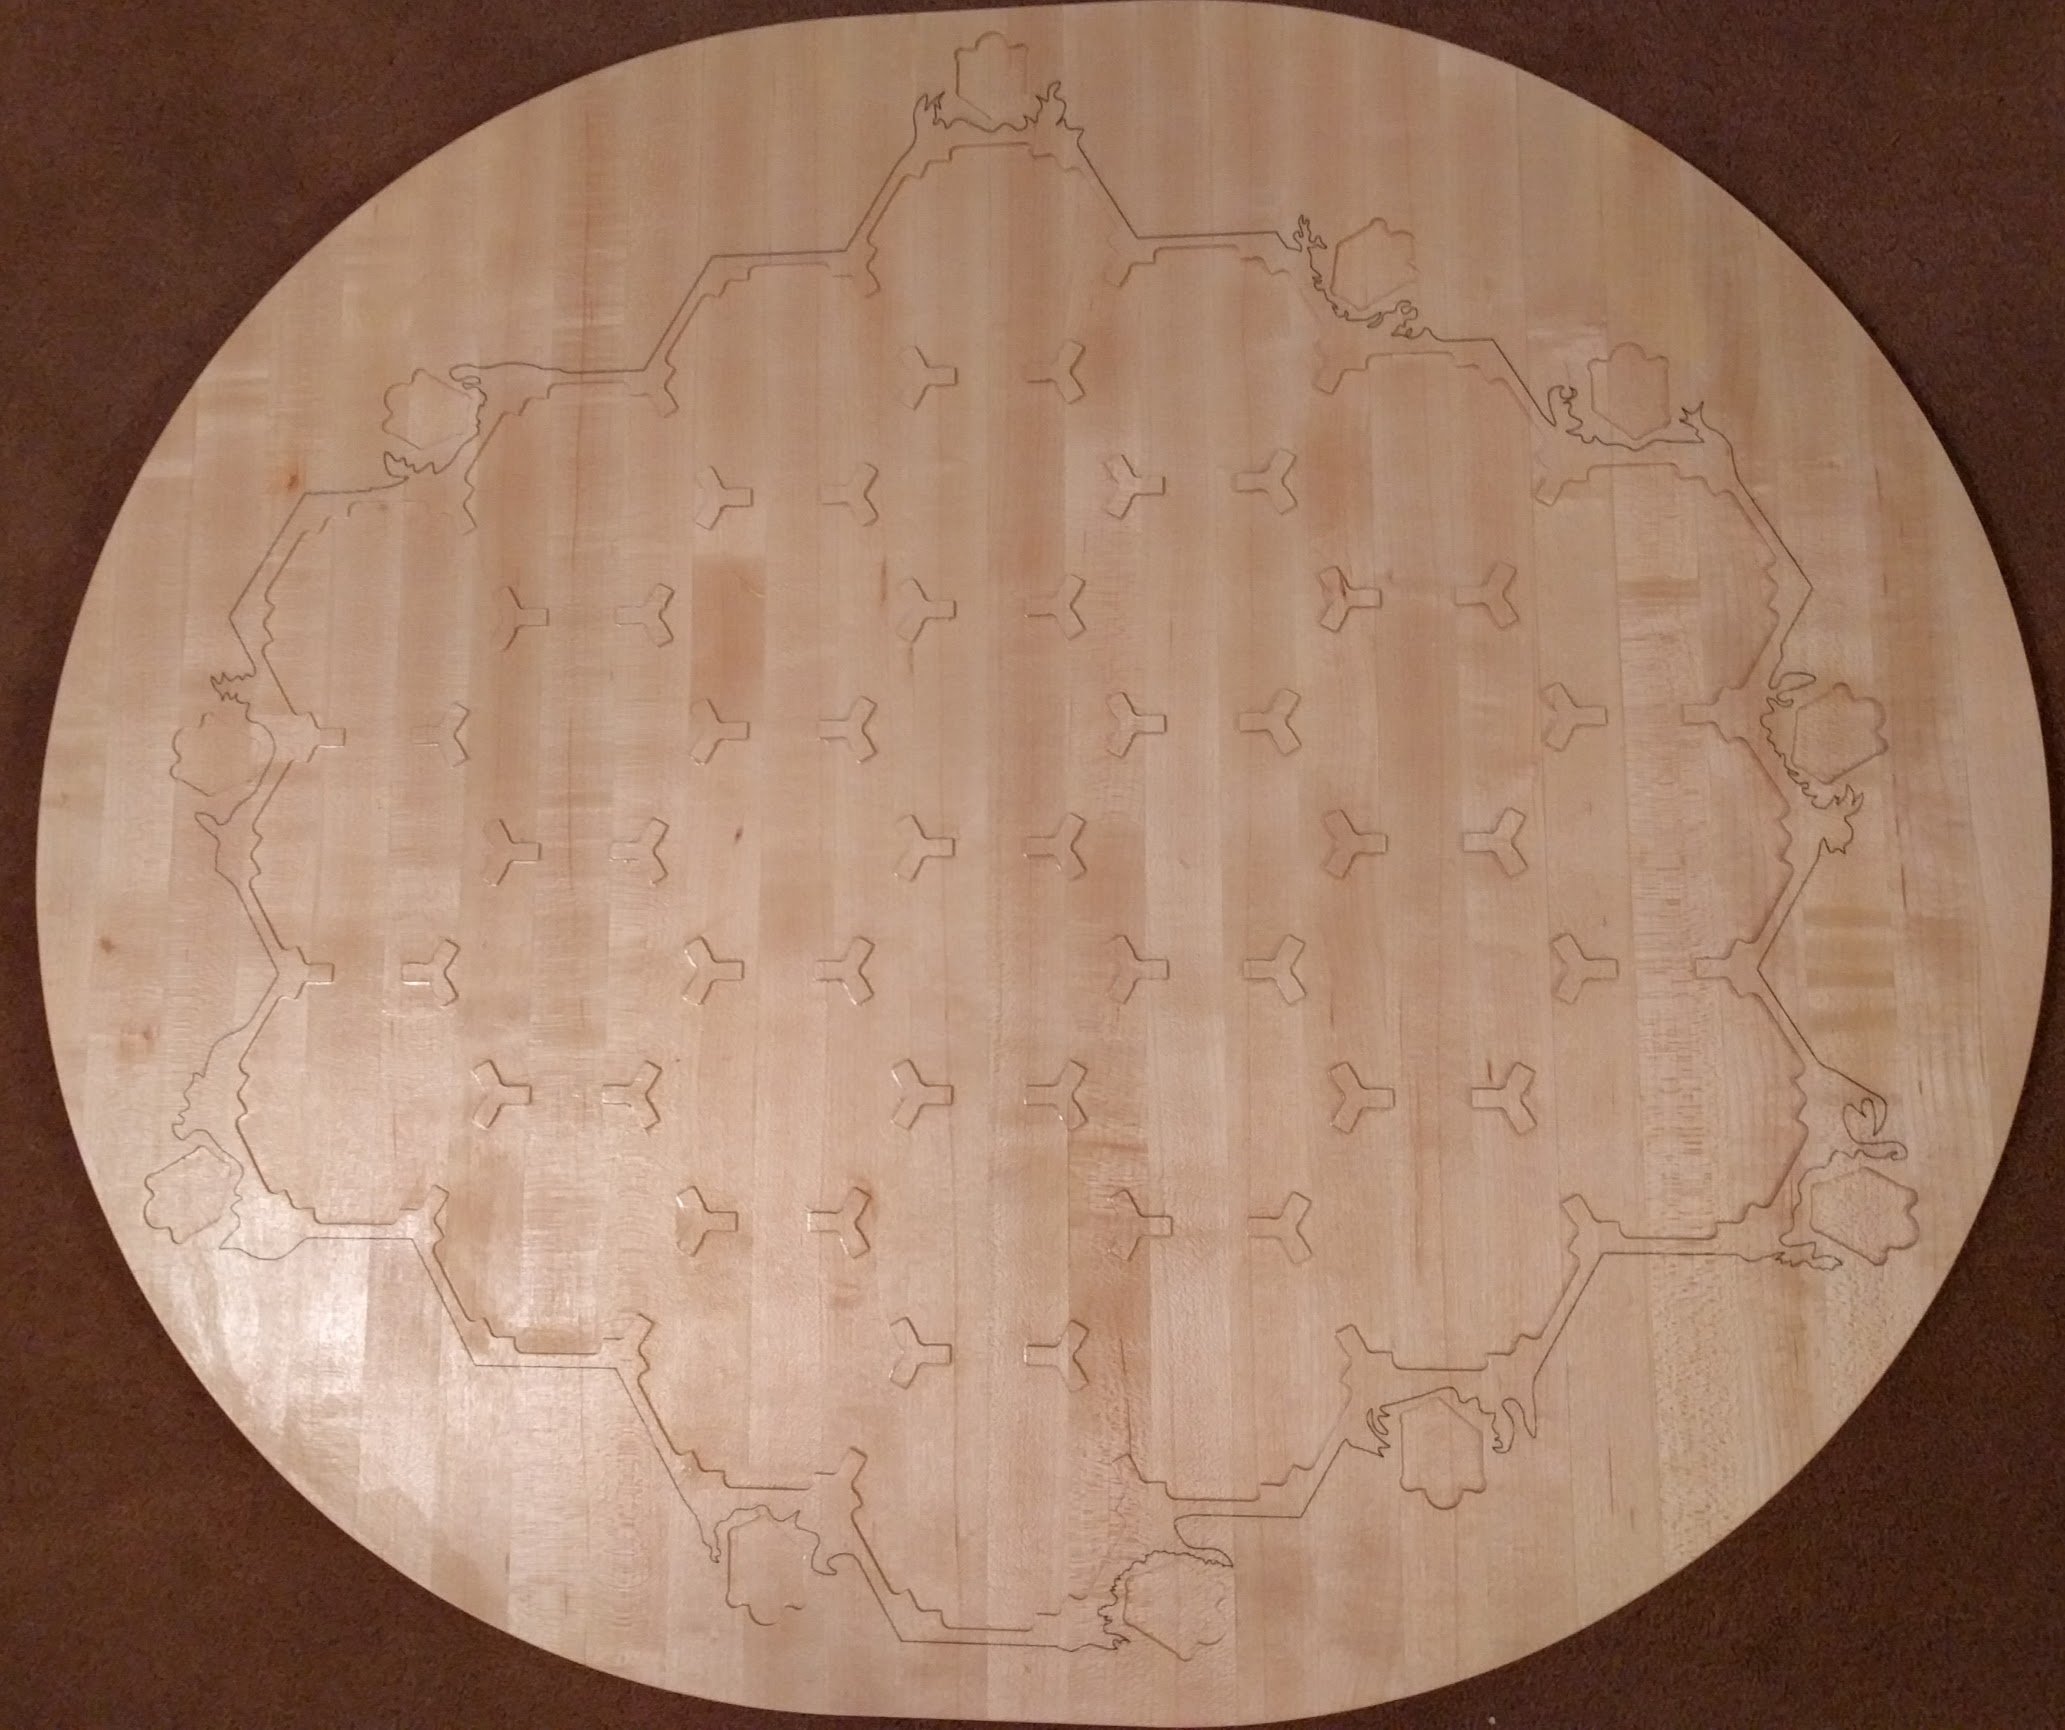 Maple Catan play board for the expanded player game